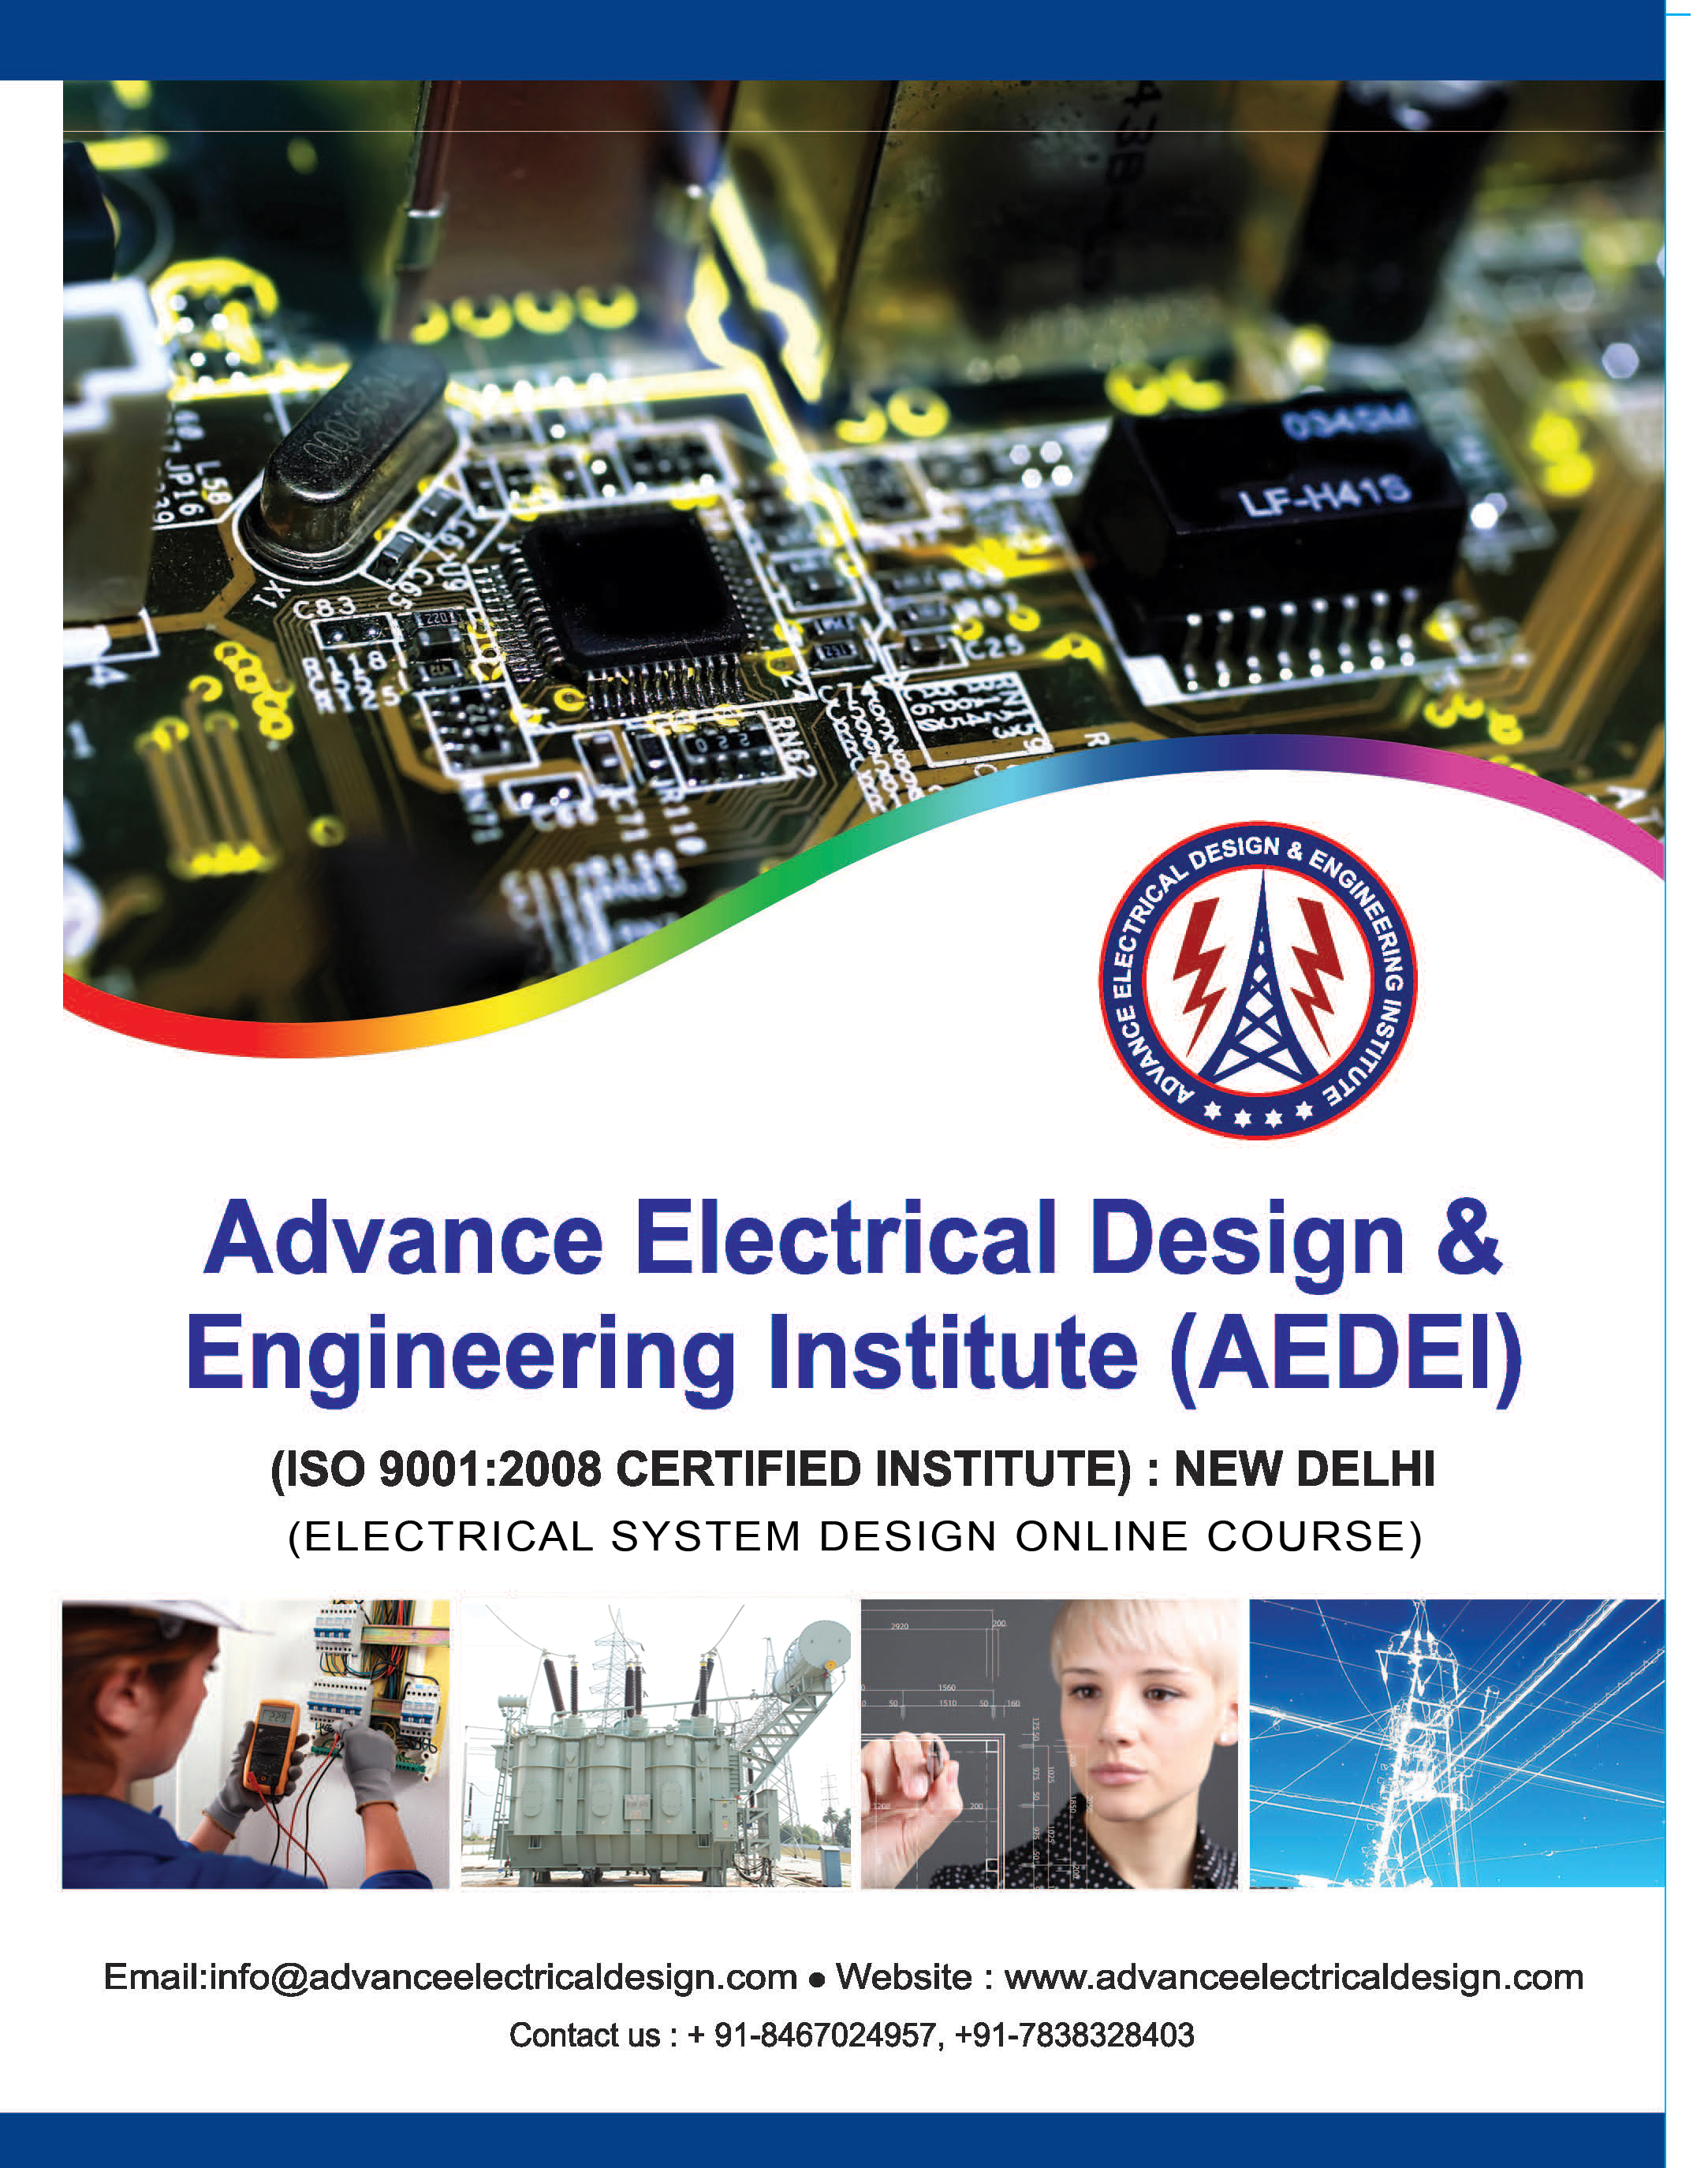 Online Electrical Design Engineering Course in delhi,Institute offer online Electrical Design course